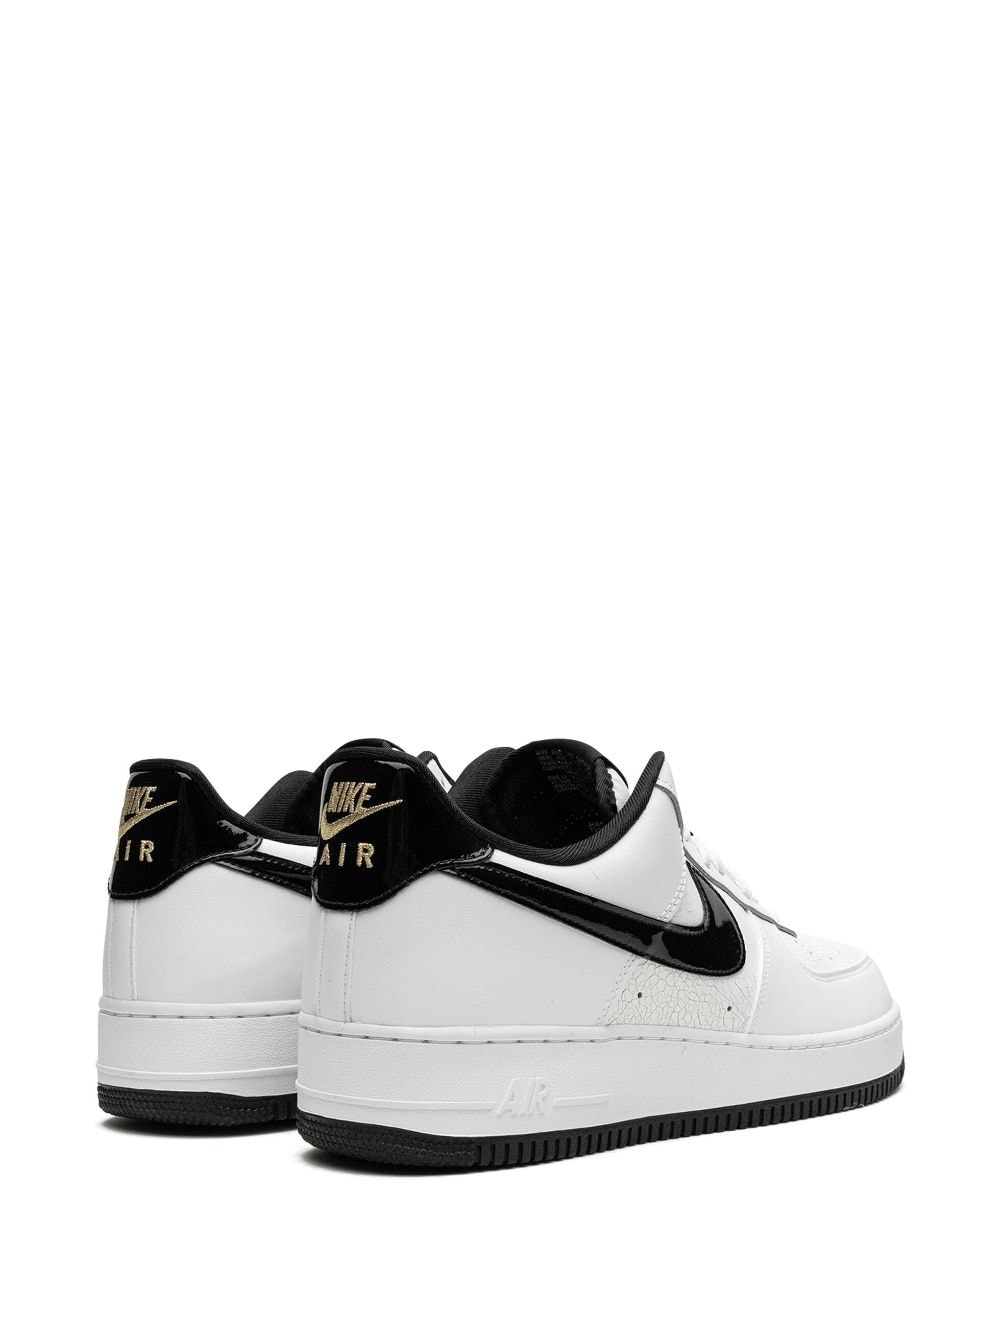 Nike Air Force 1 Low World Champ